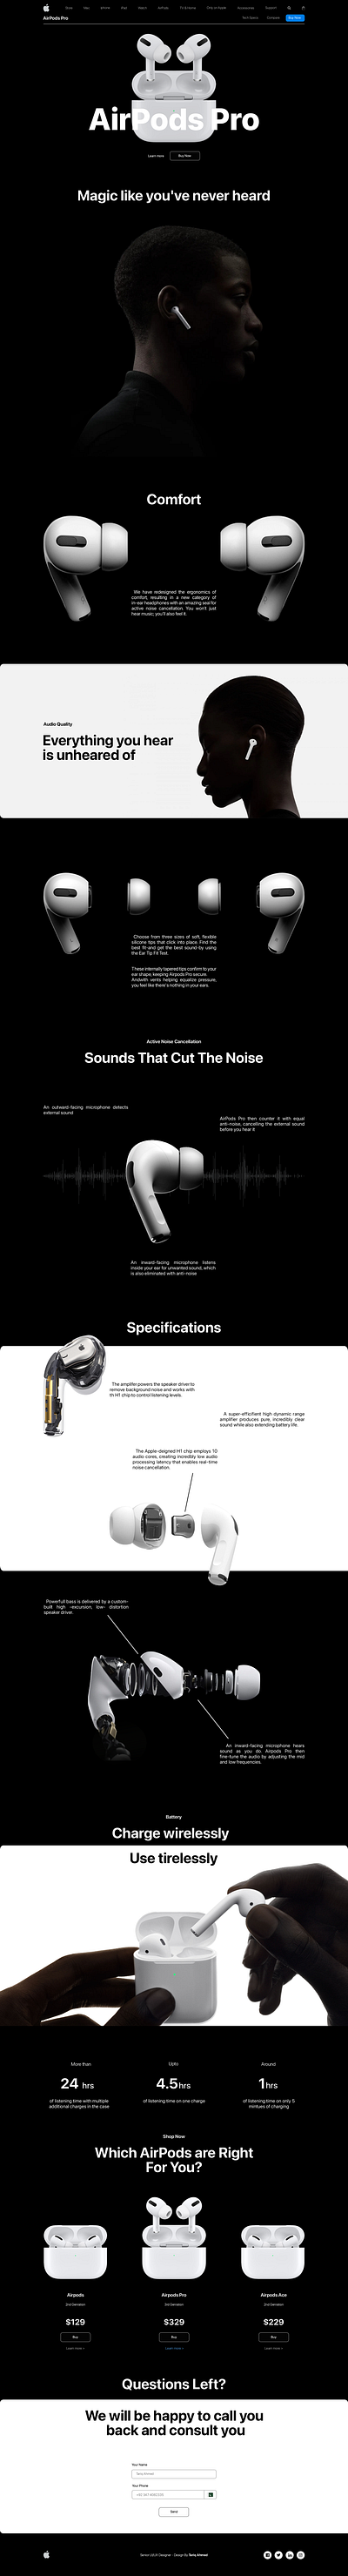 Apple Airpods | Redesigned website page design graphic design poster typography ui ux